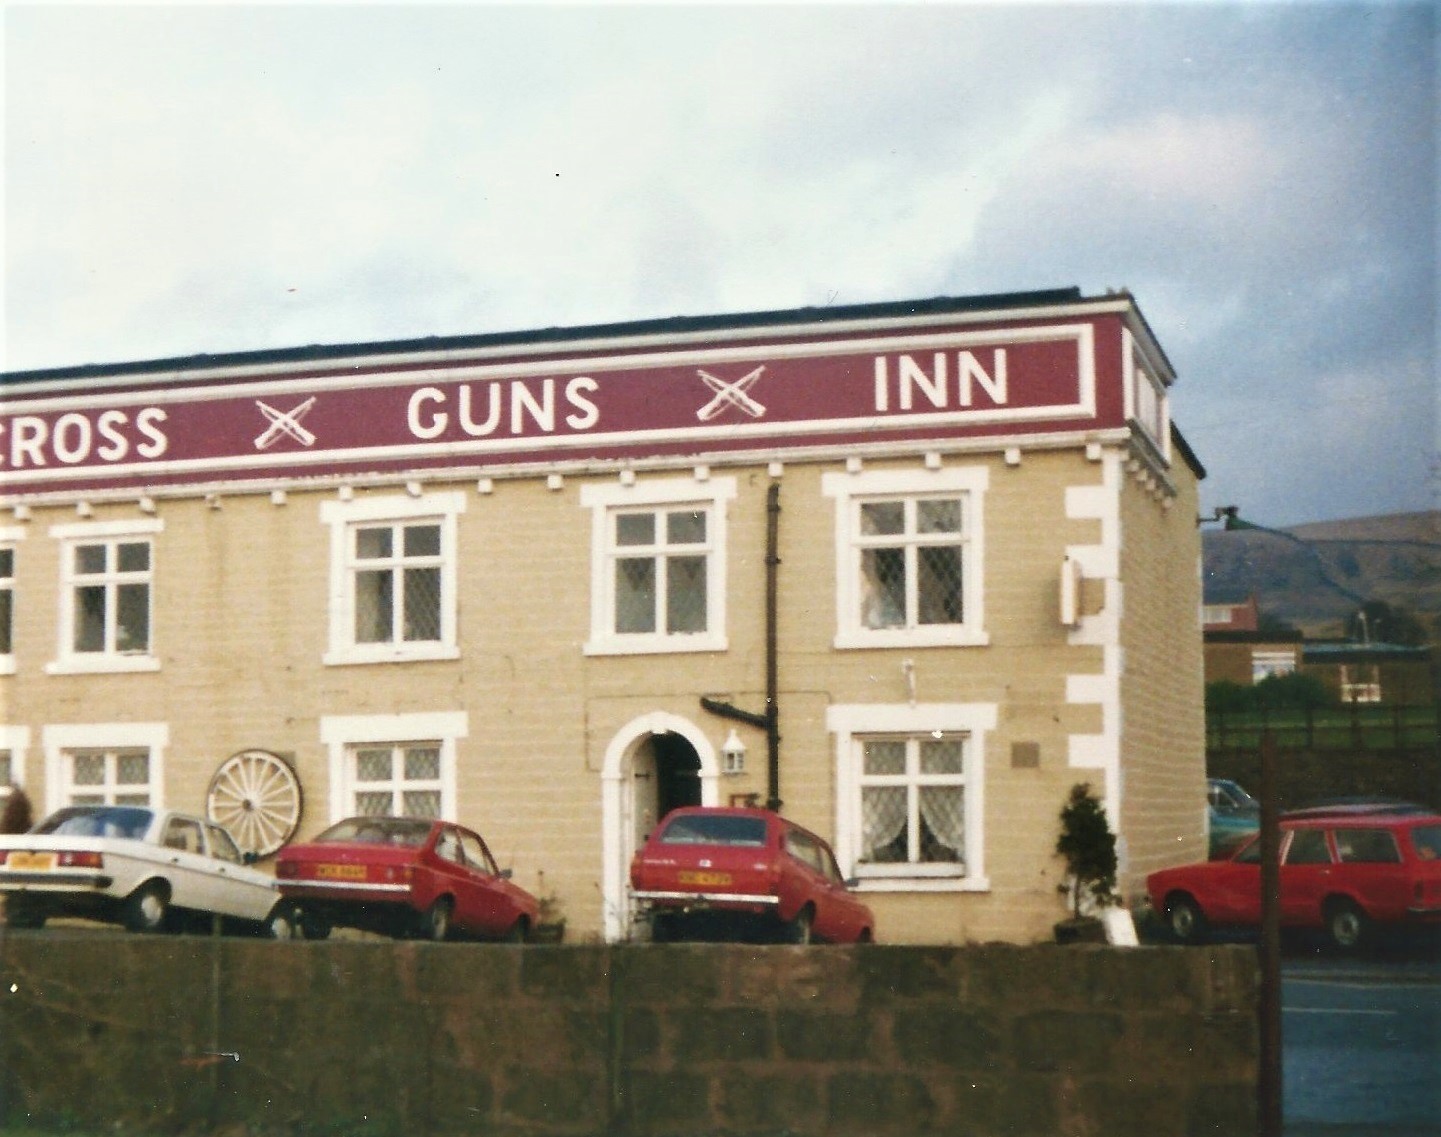 Who went in these pubs? Cross+Guns